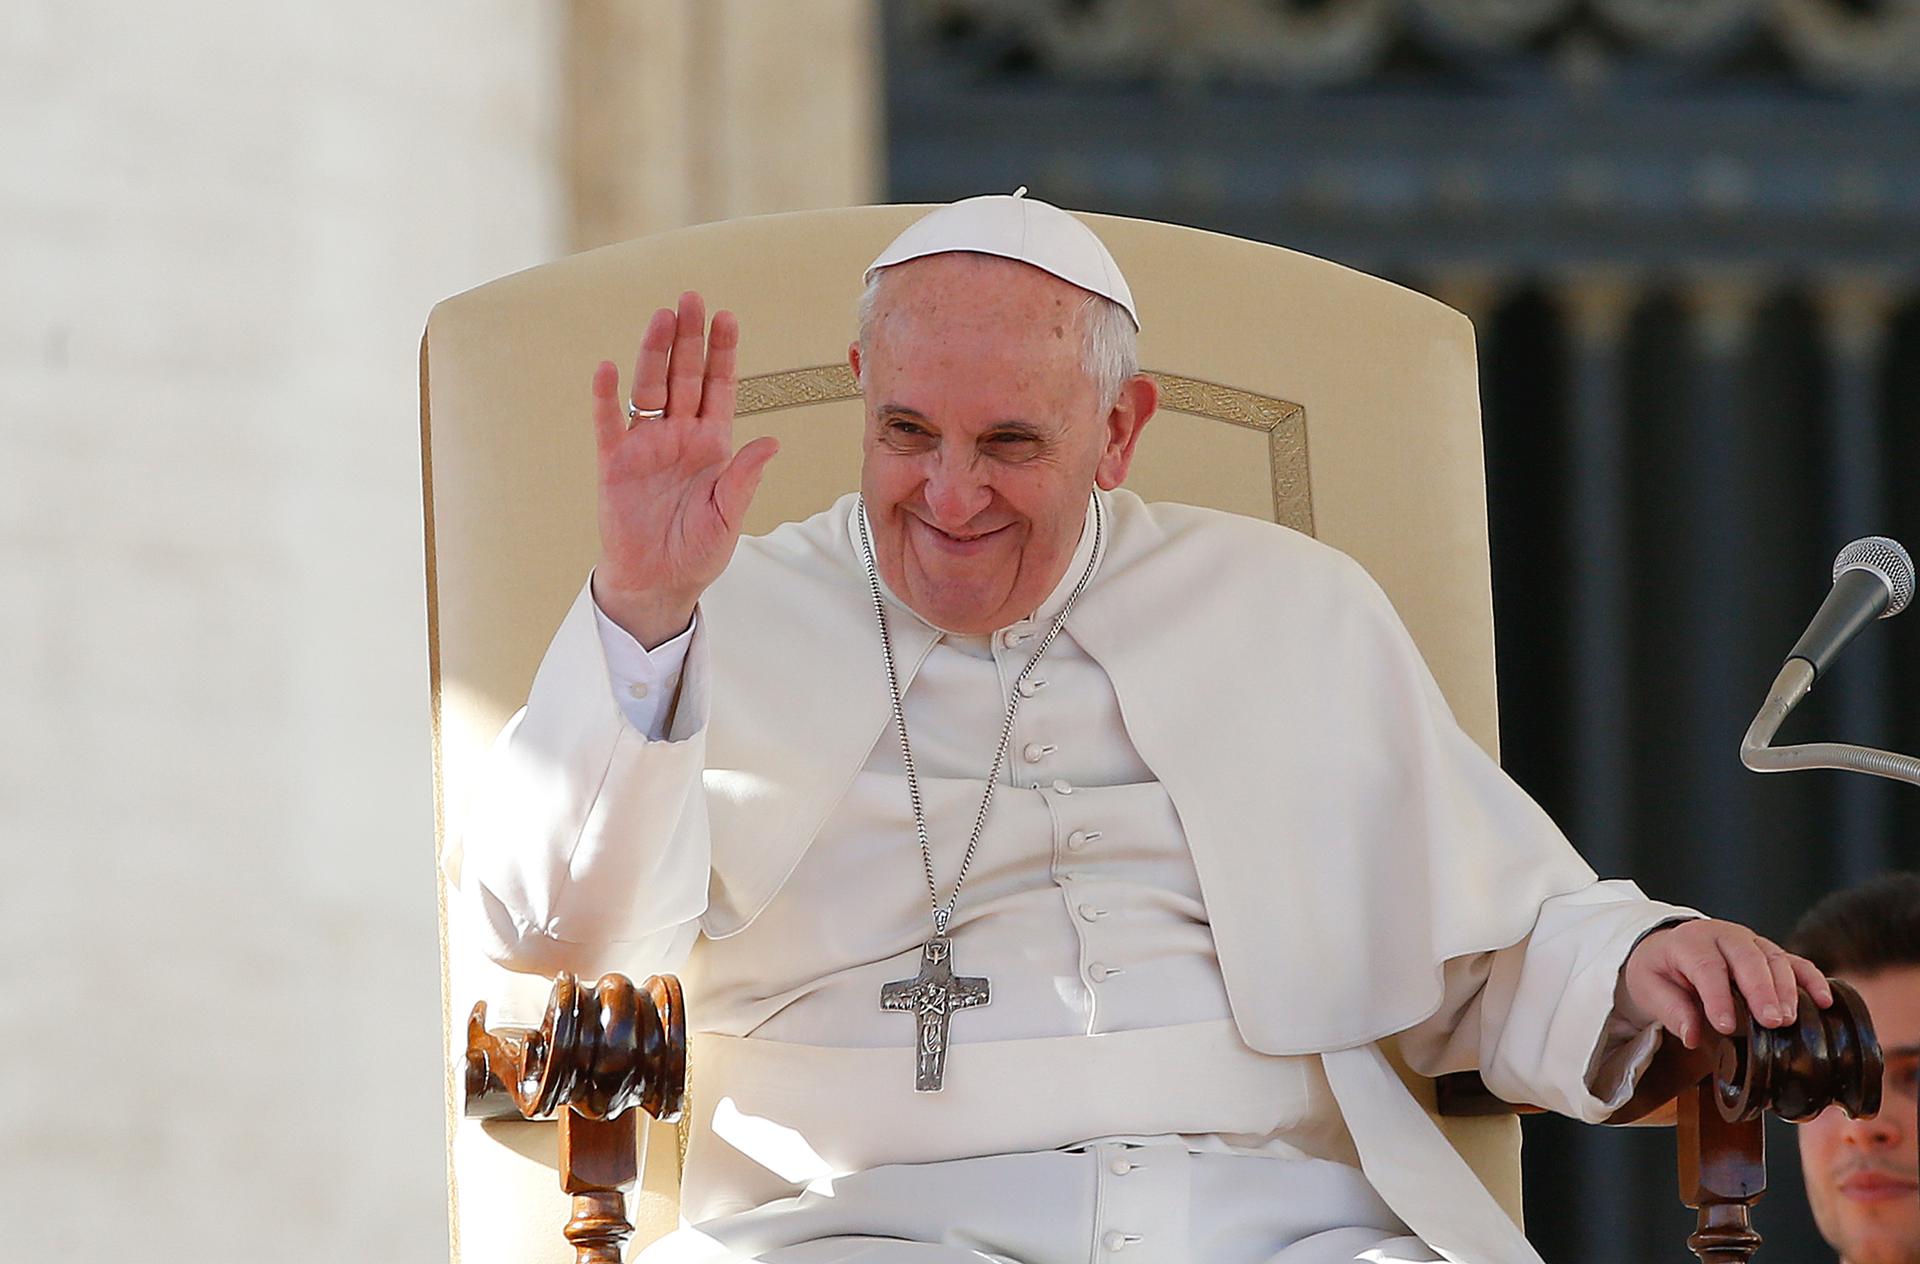 Pope smiling in Feb 2014